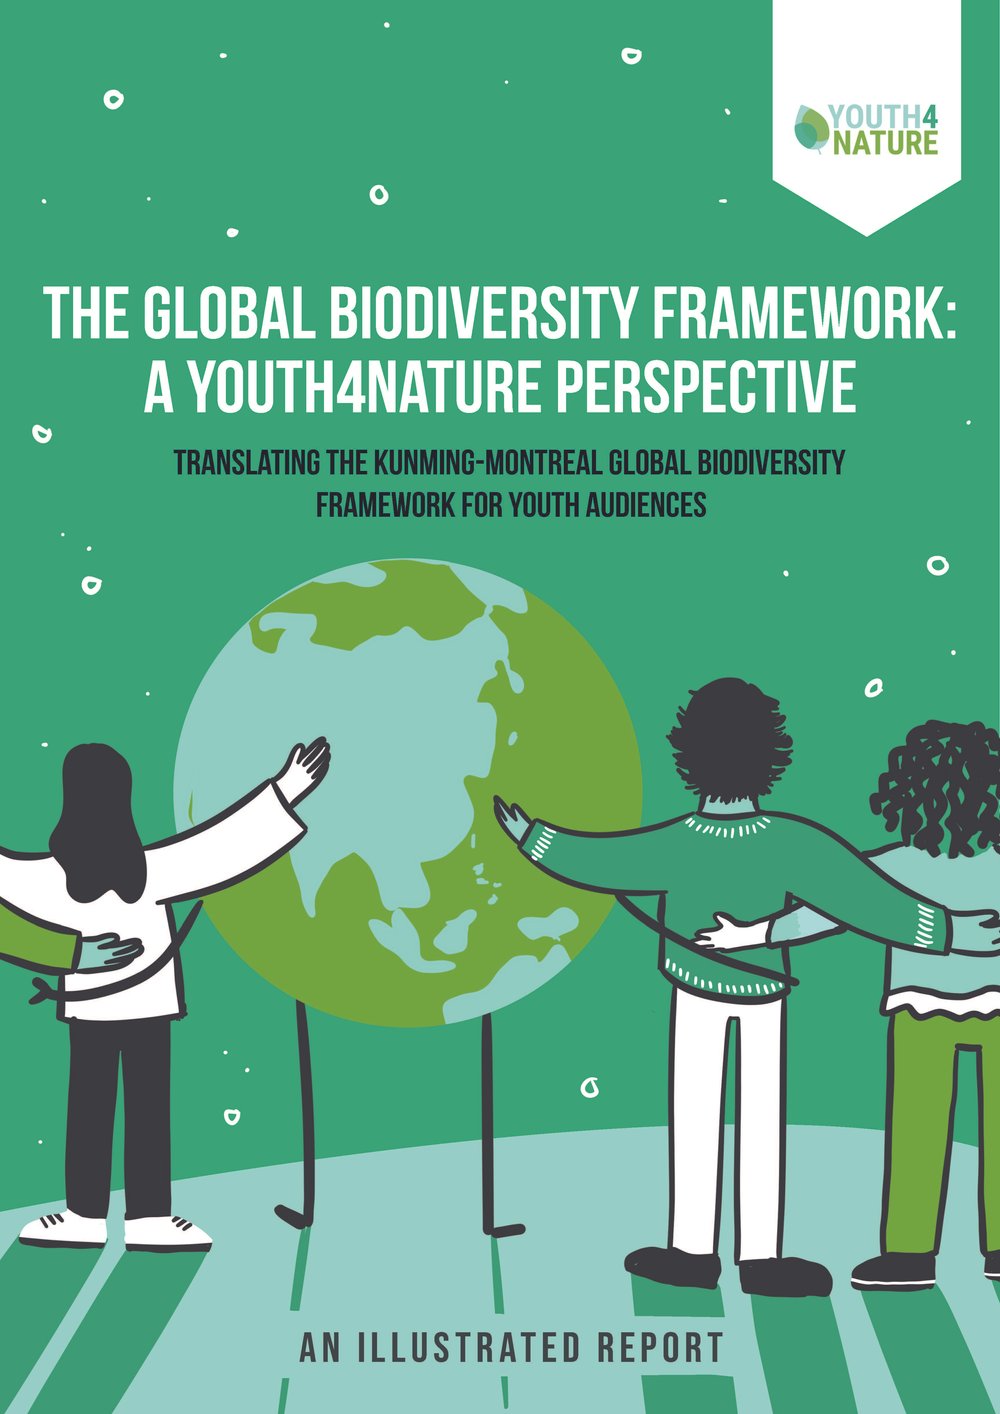 The Global Biodiversity Framework_A Y4N Perspective_Illustrated Report_Page_01.jpg